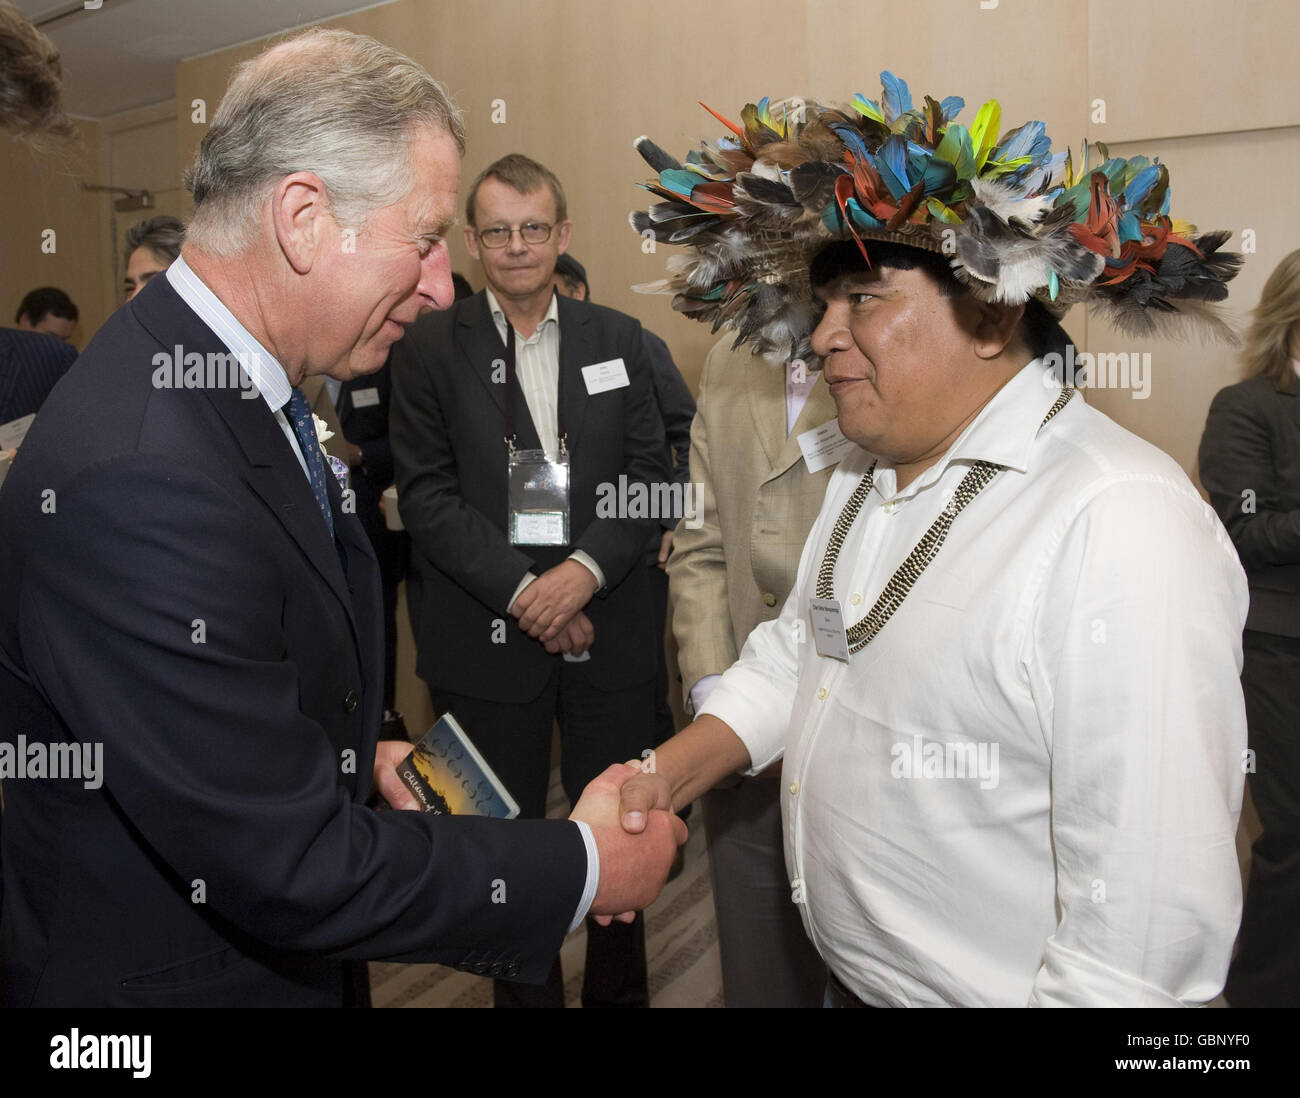 The Prince of Wales meets Amazonian tribal leader Chief Almir Narayamoga Surui, from the Surui tribe at Google's annual European Zeitgeist gathering in Hertfordshire. Stock Photo